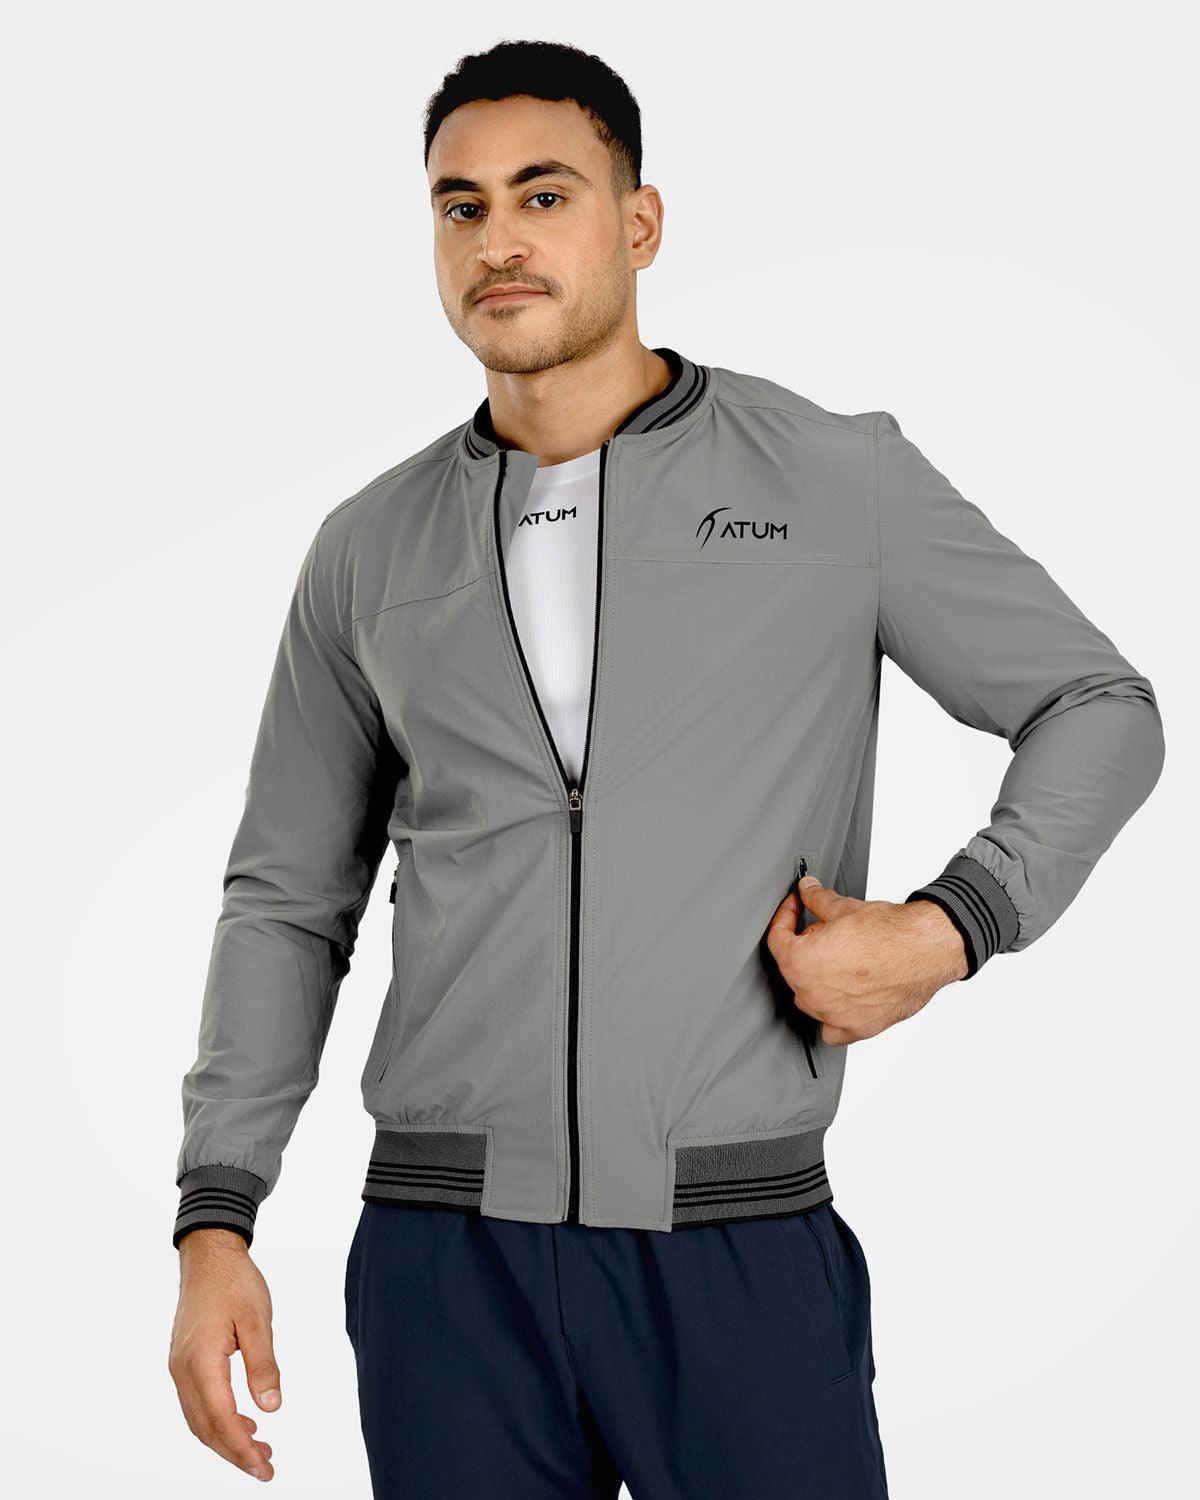 Photo by 𝗔𝗧𝗨ð�— SPORTSWEAR ® on December 20, 2022. May be an image of 1 man wear gray jacket with white basic t-shirt.